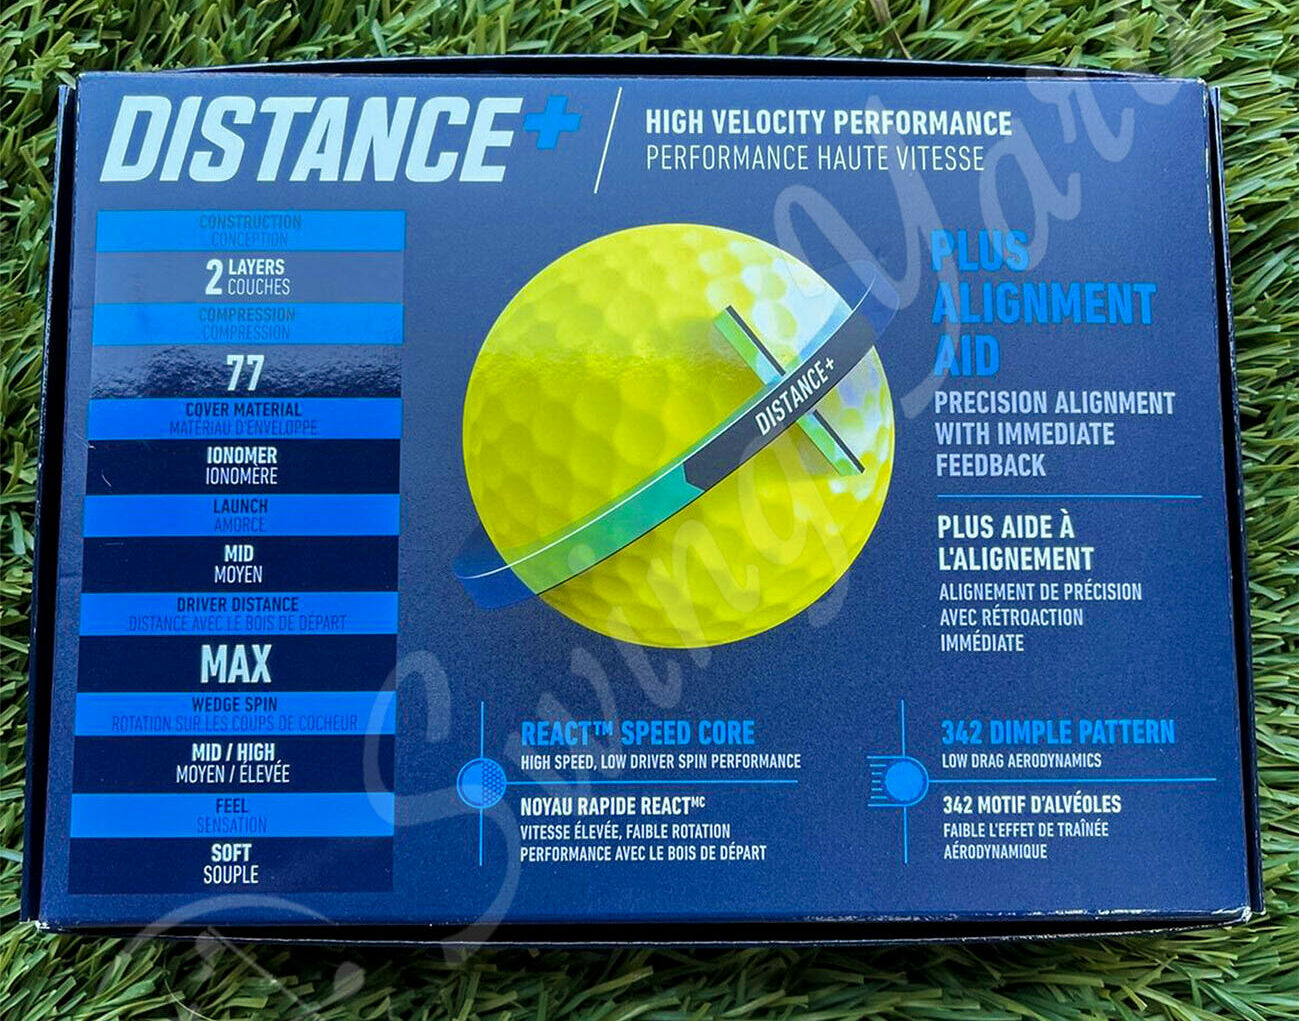 A backside view of TaylorMade Distance Plus box